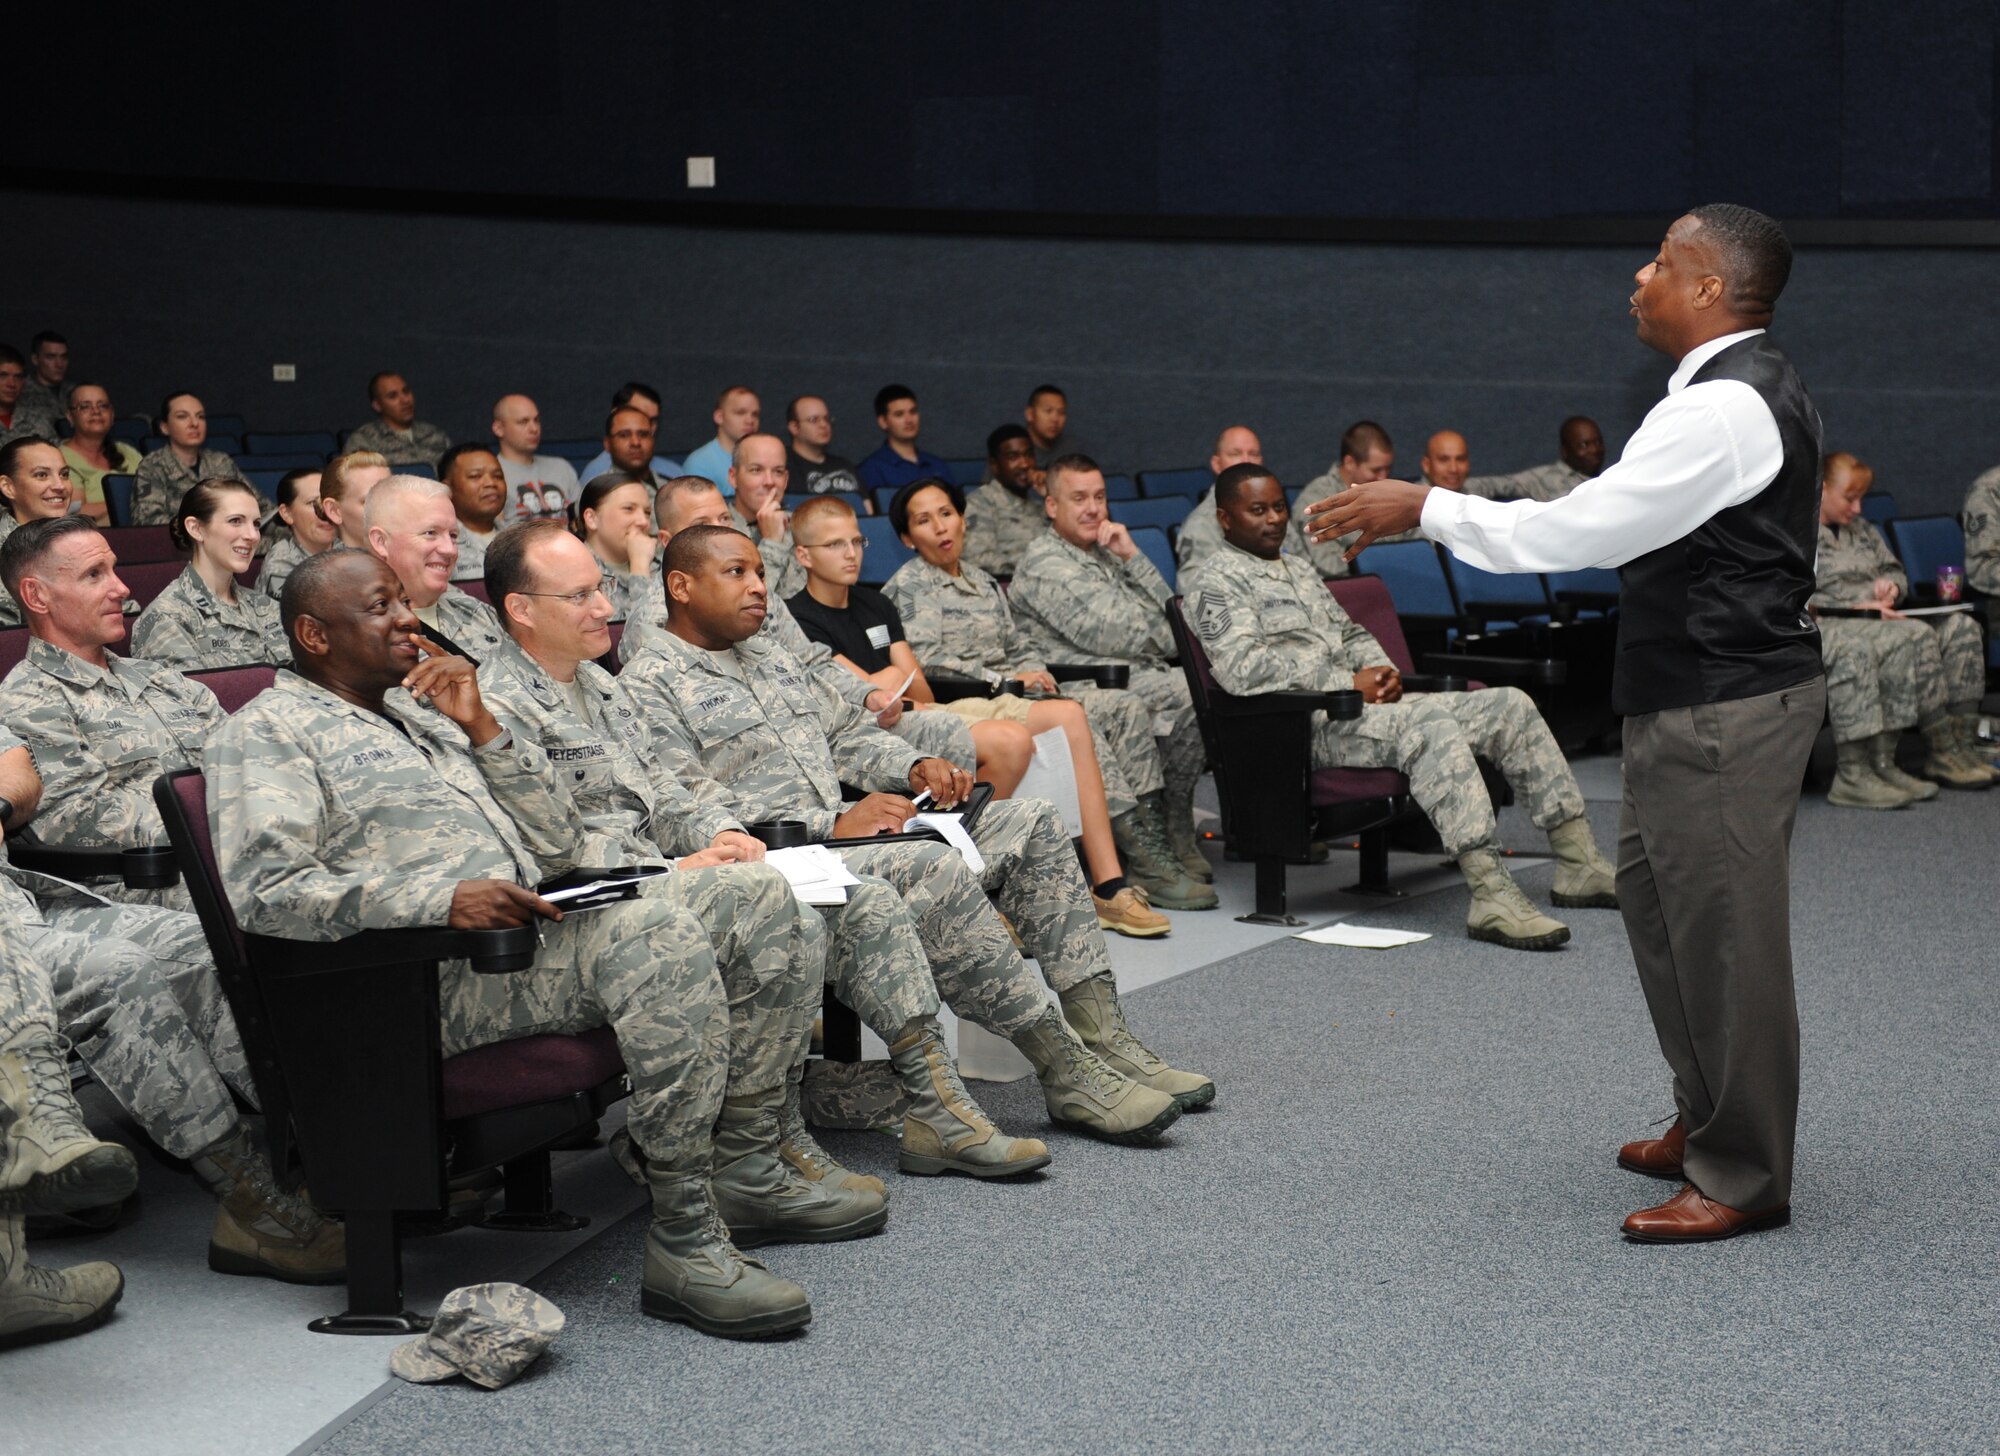 Retired Chief Master Sgt. Anthony Brinkley speaks at a leadership and personal development seminar at the Welch Theater June 24, 2016 on Keesler Air Force Base, Miss. Brinkley, with more than 28 years of military experience, is delivering seminars highlighting leadership development, motivational speaking and team building to military members and civilians at all 2nd Air Force bases. (U.S. Air Force photo by Kemberly Groue/Released)